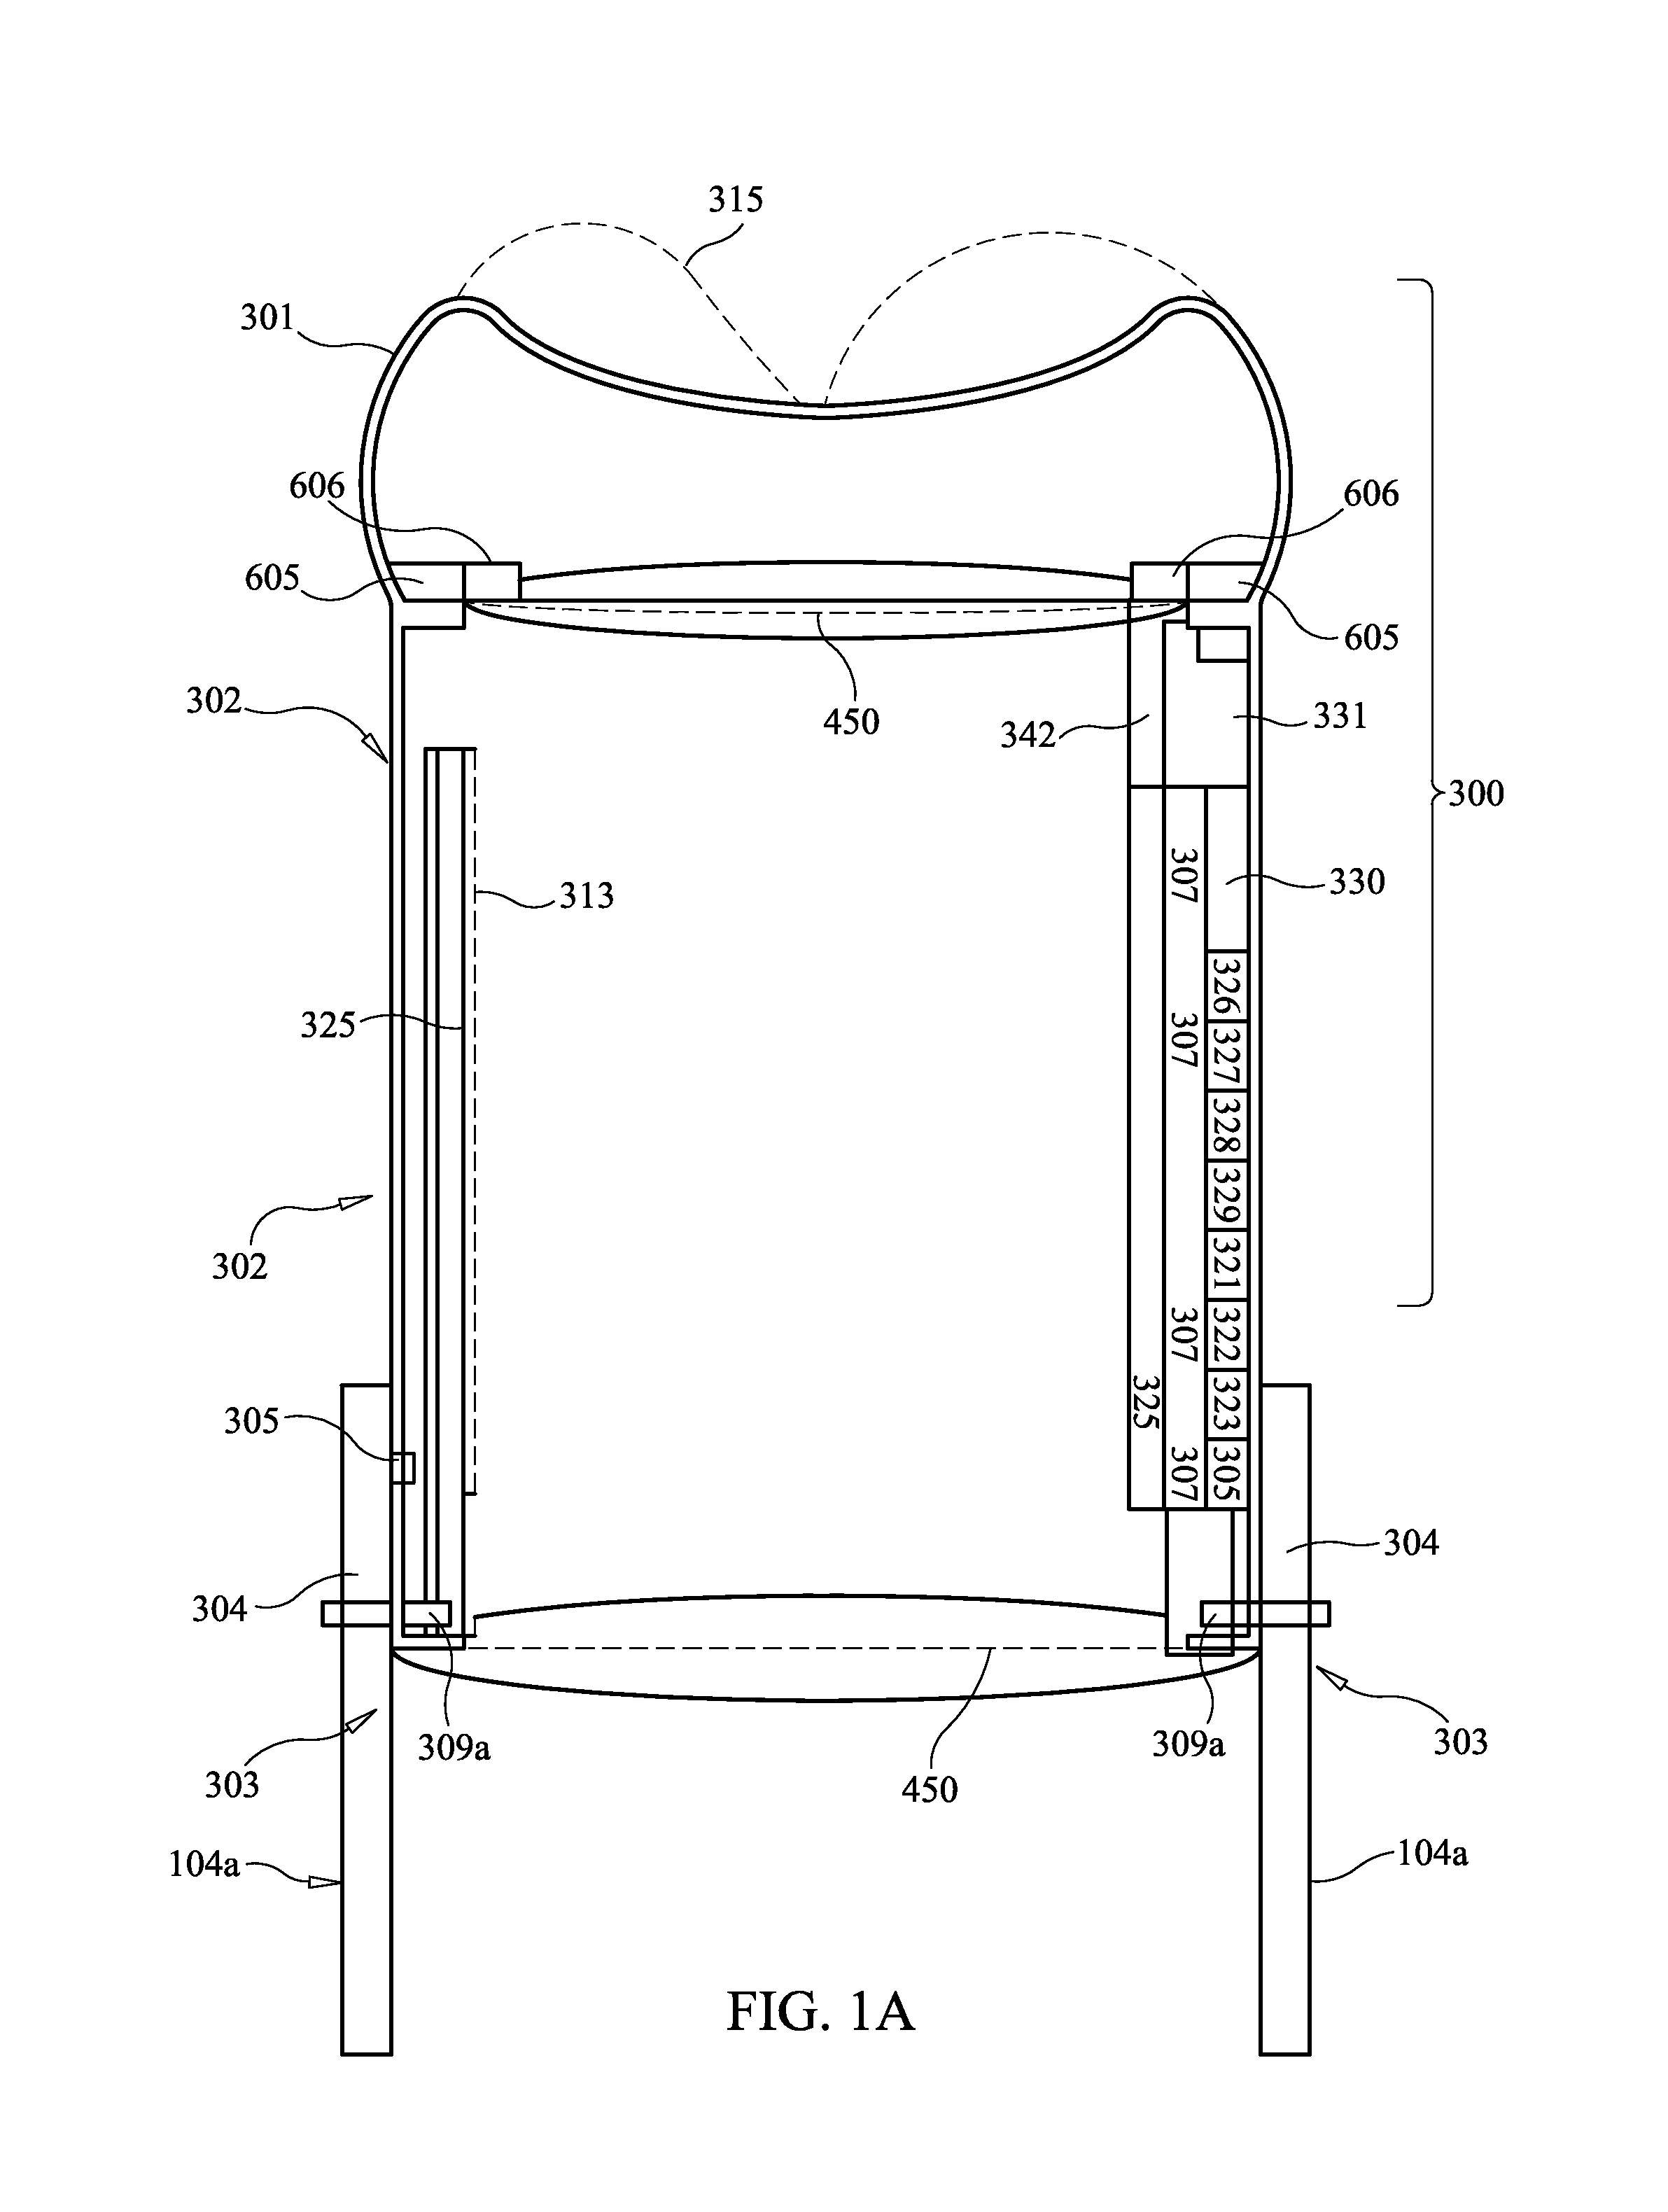 Drill bit and cylinder body device, assemblies, systems and methods